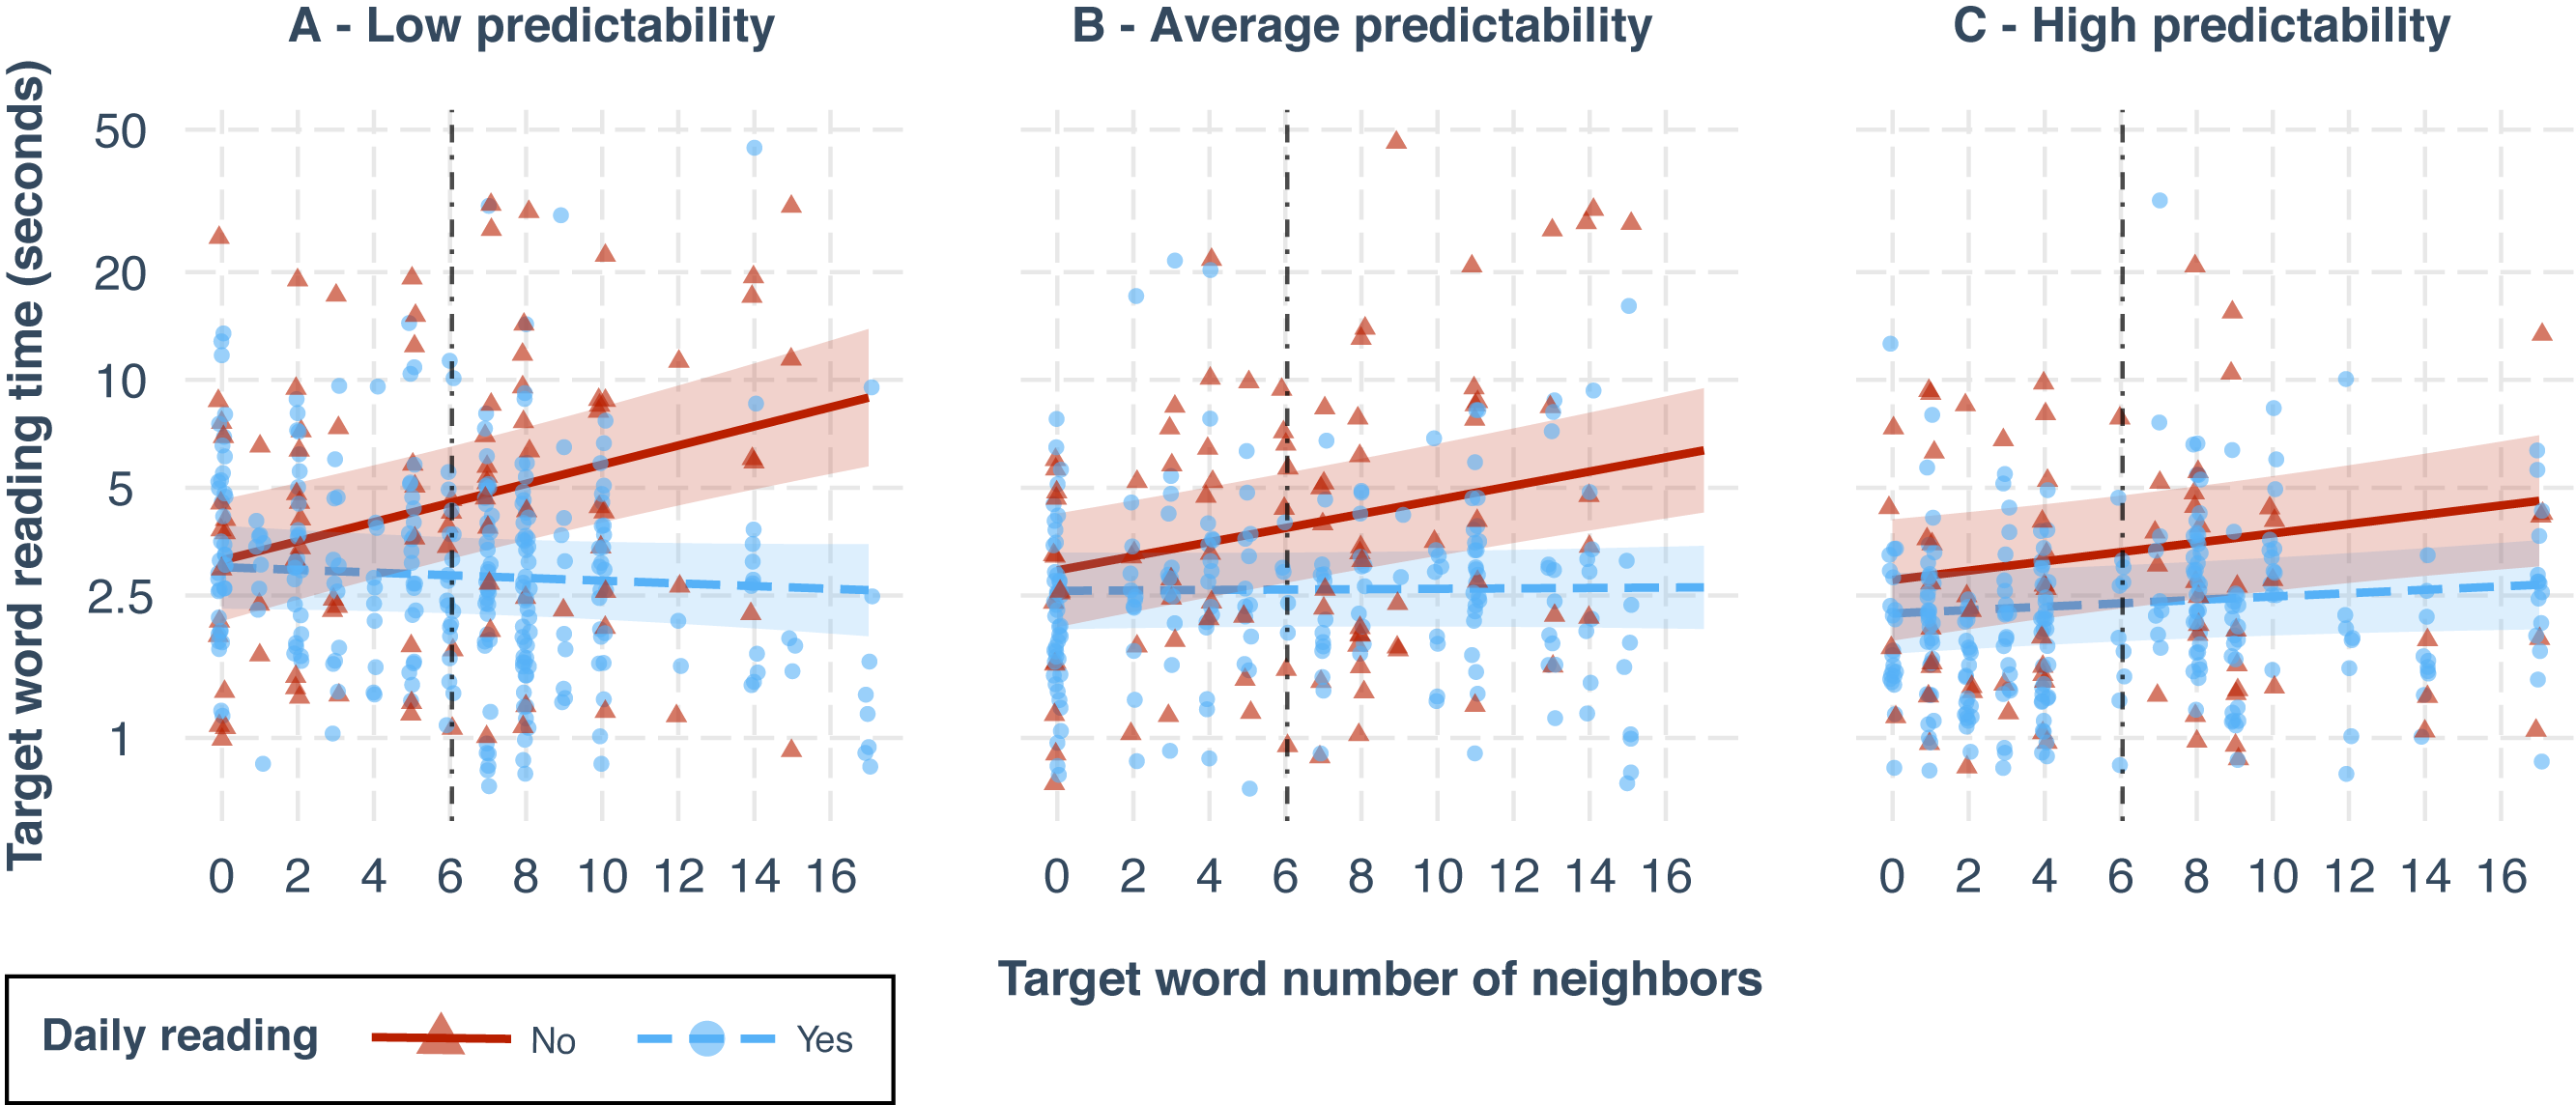 Effect of neighborhood size (N) on reading time, depending on word predictability and reading proficiency. Raw data points and fitted lines estimated by the LME model are grouped by reading proficiency: red for participants who quit reading on a daily basis, blue for participants still reading daily. Each subplot represents the effect of N for a different value of the trigram occurrence distribution, split into three equal-sized groups (i.e., terciles): (A) median of the lower tercile, (B) median of the middle tercile, (C) median of the upper tercile.